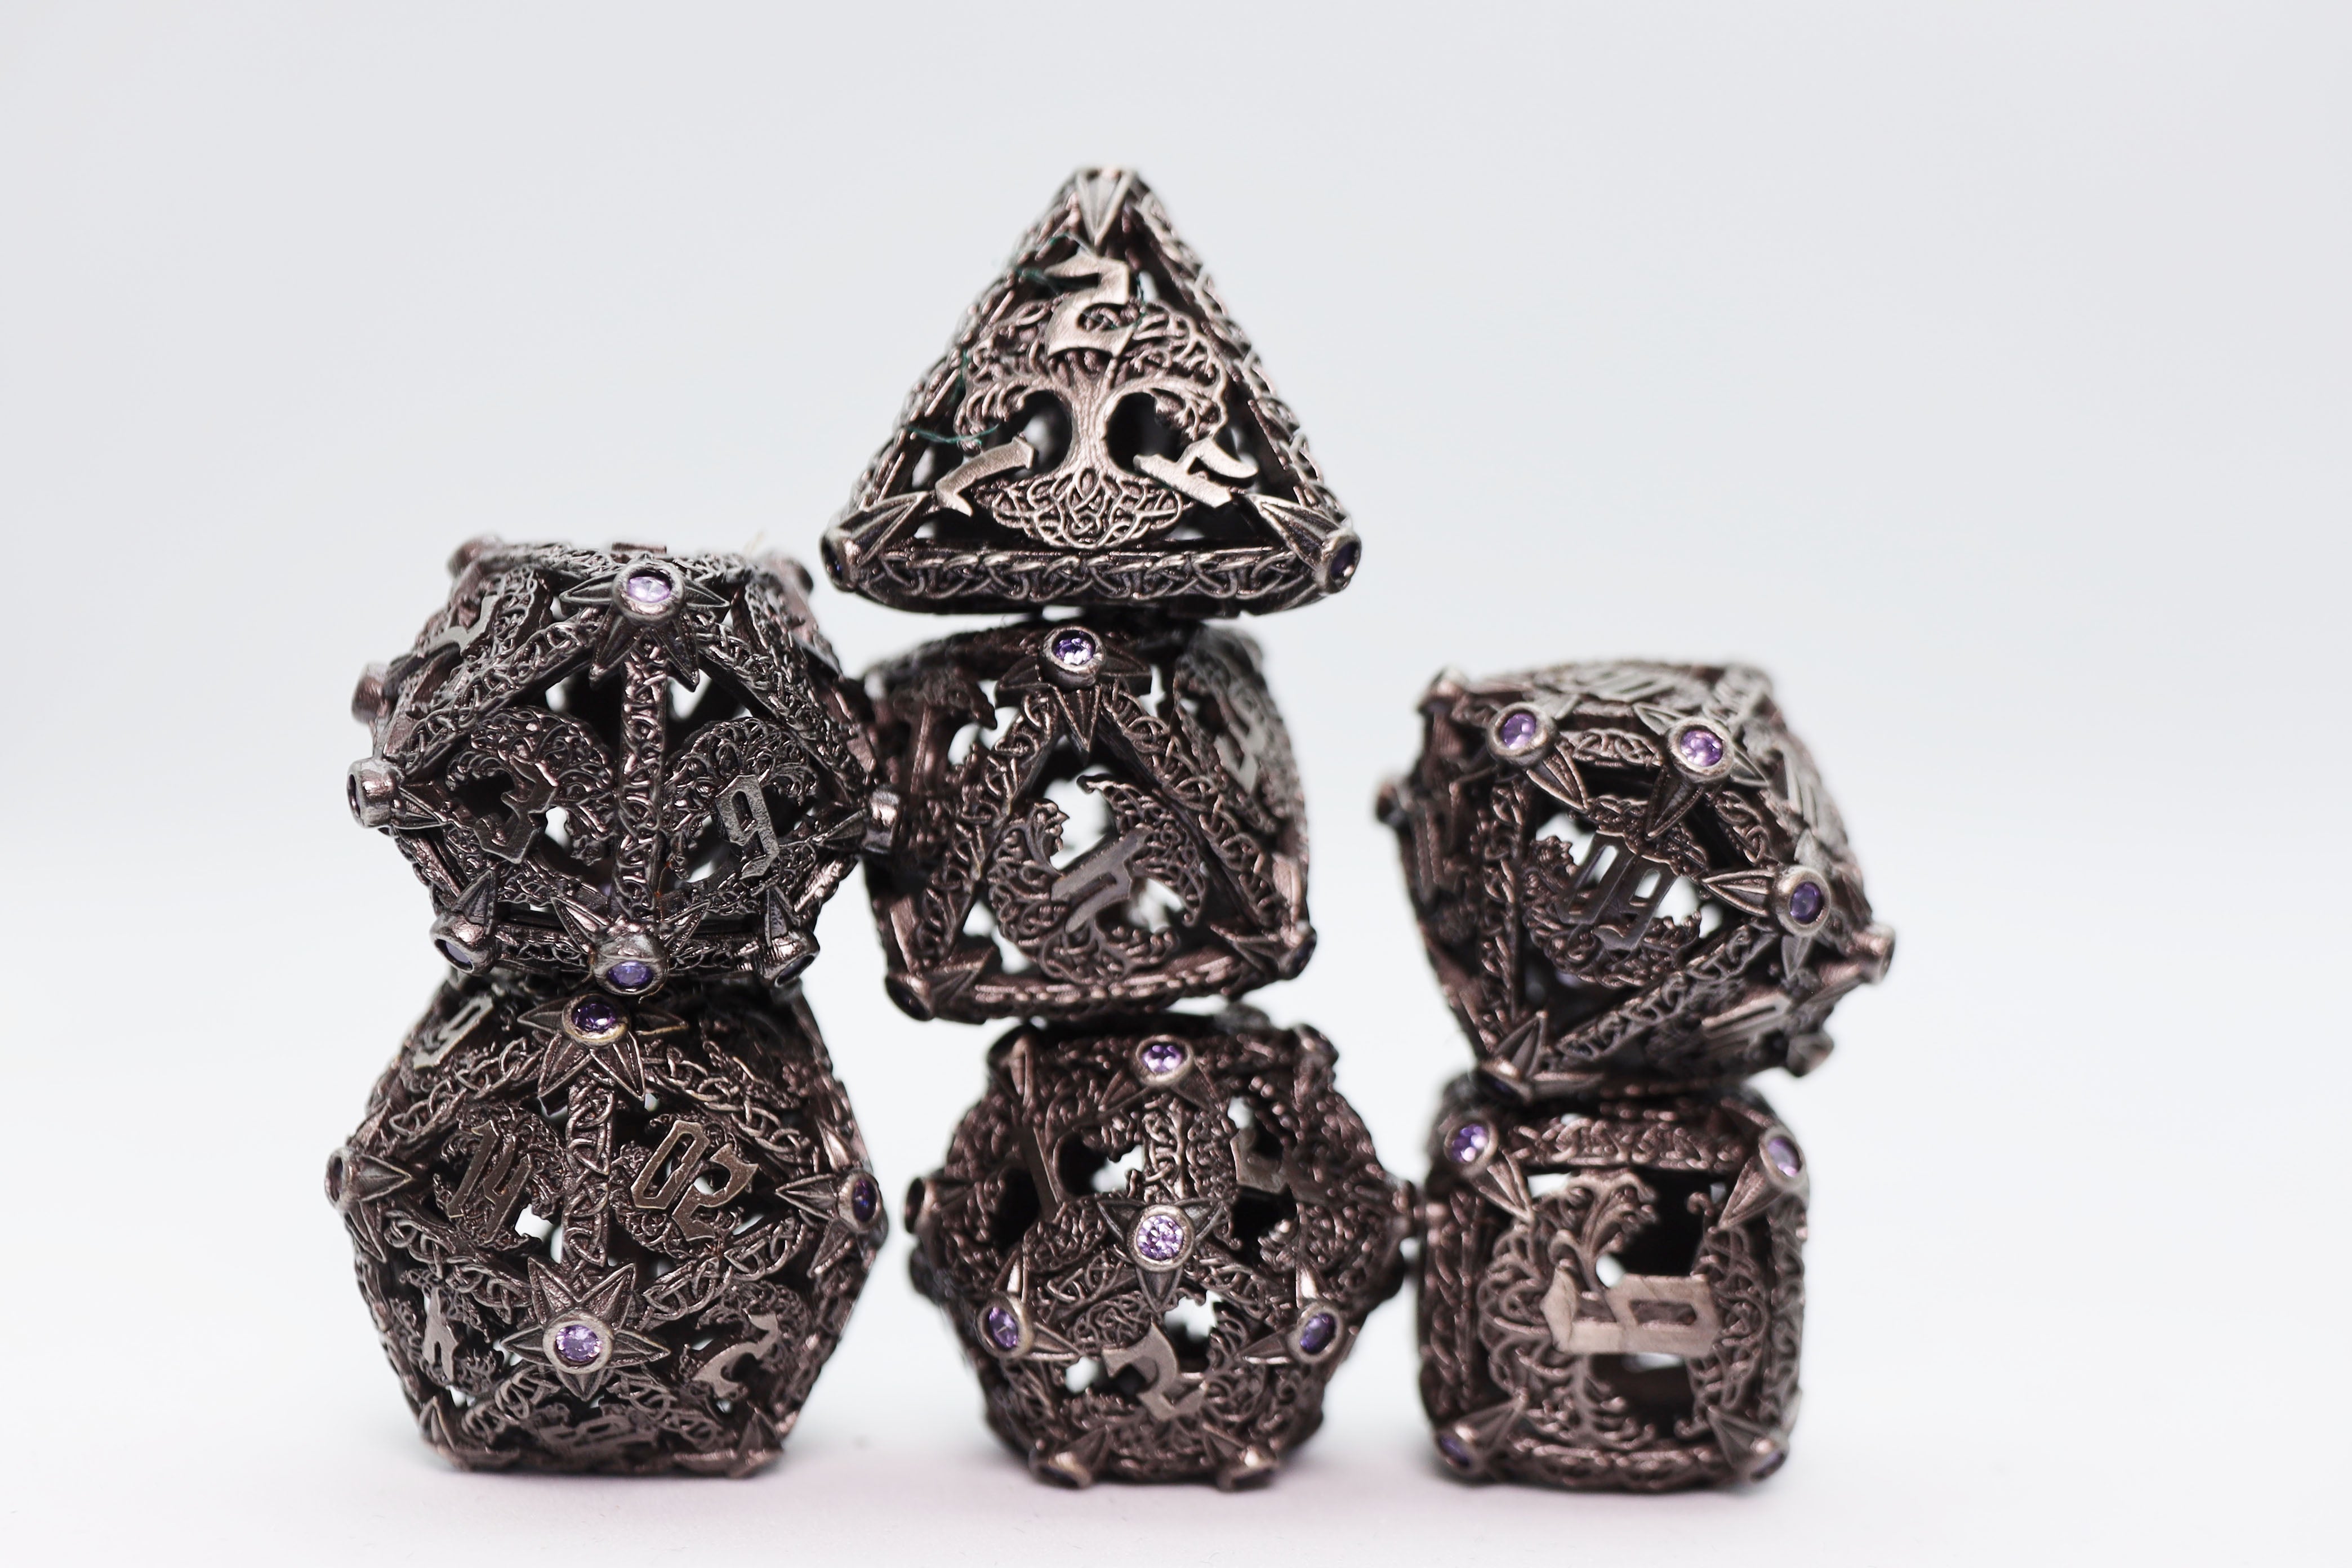 Trees of Virtue: Tree of Wisdom - Hollow Metal RPG Dice Set - Bards & Cards